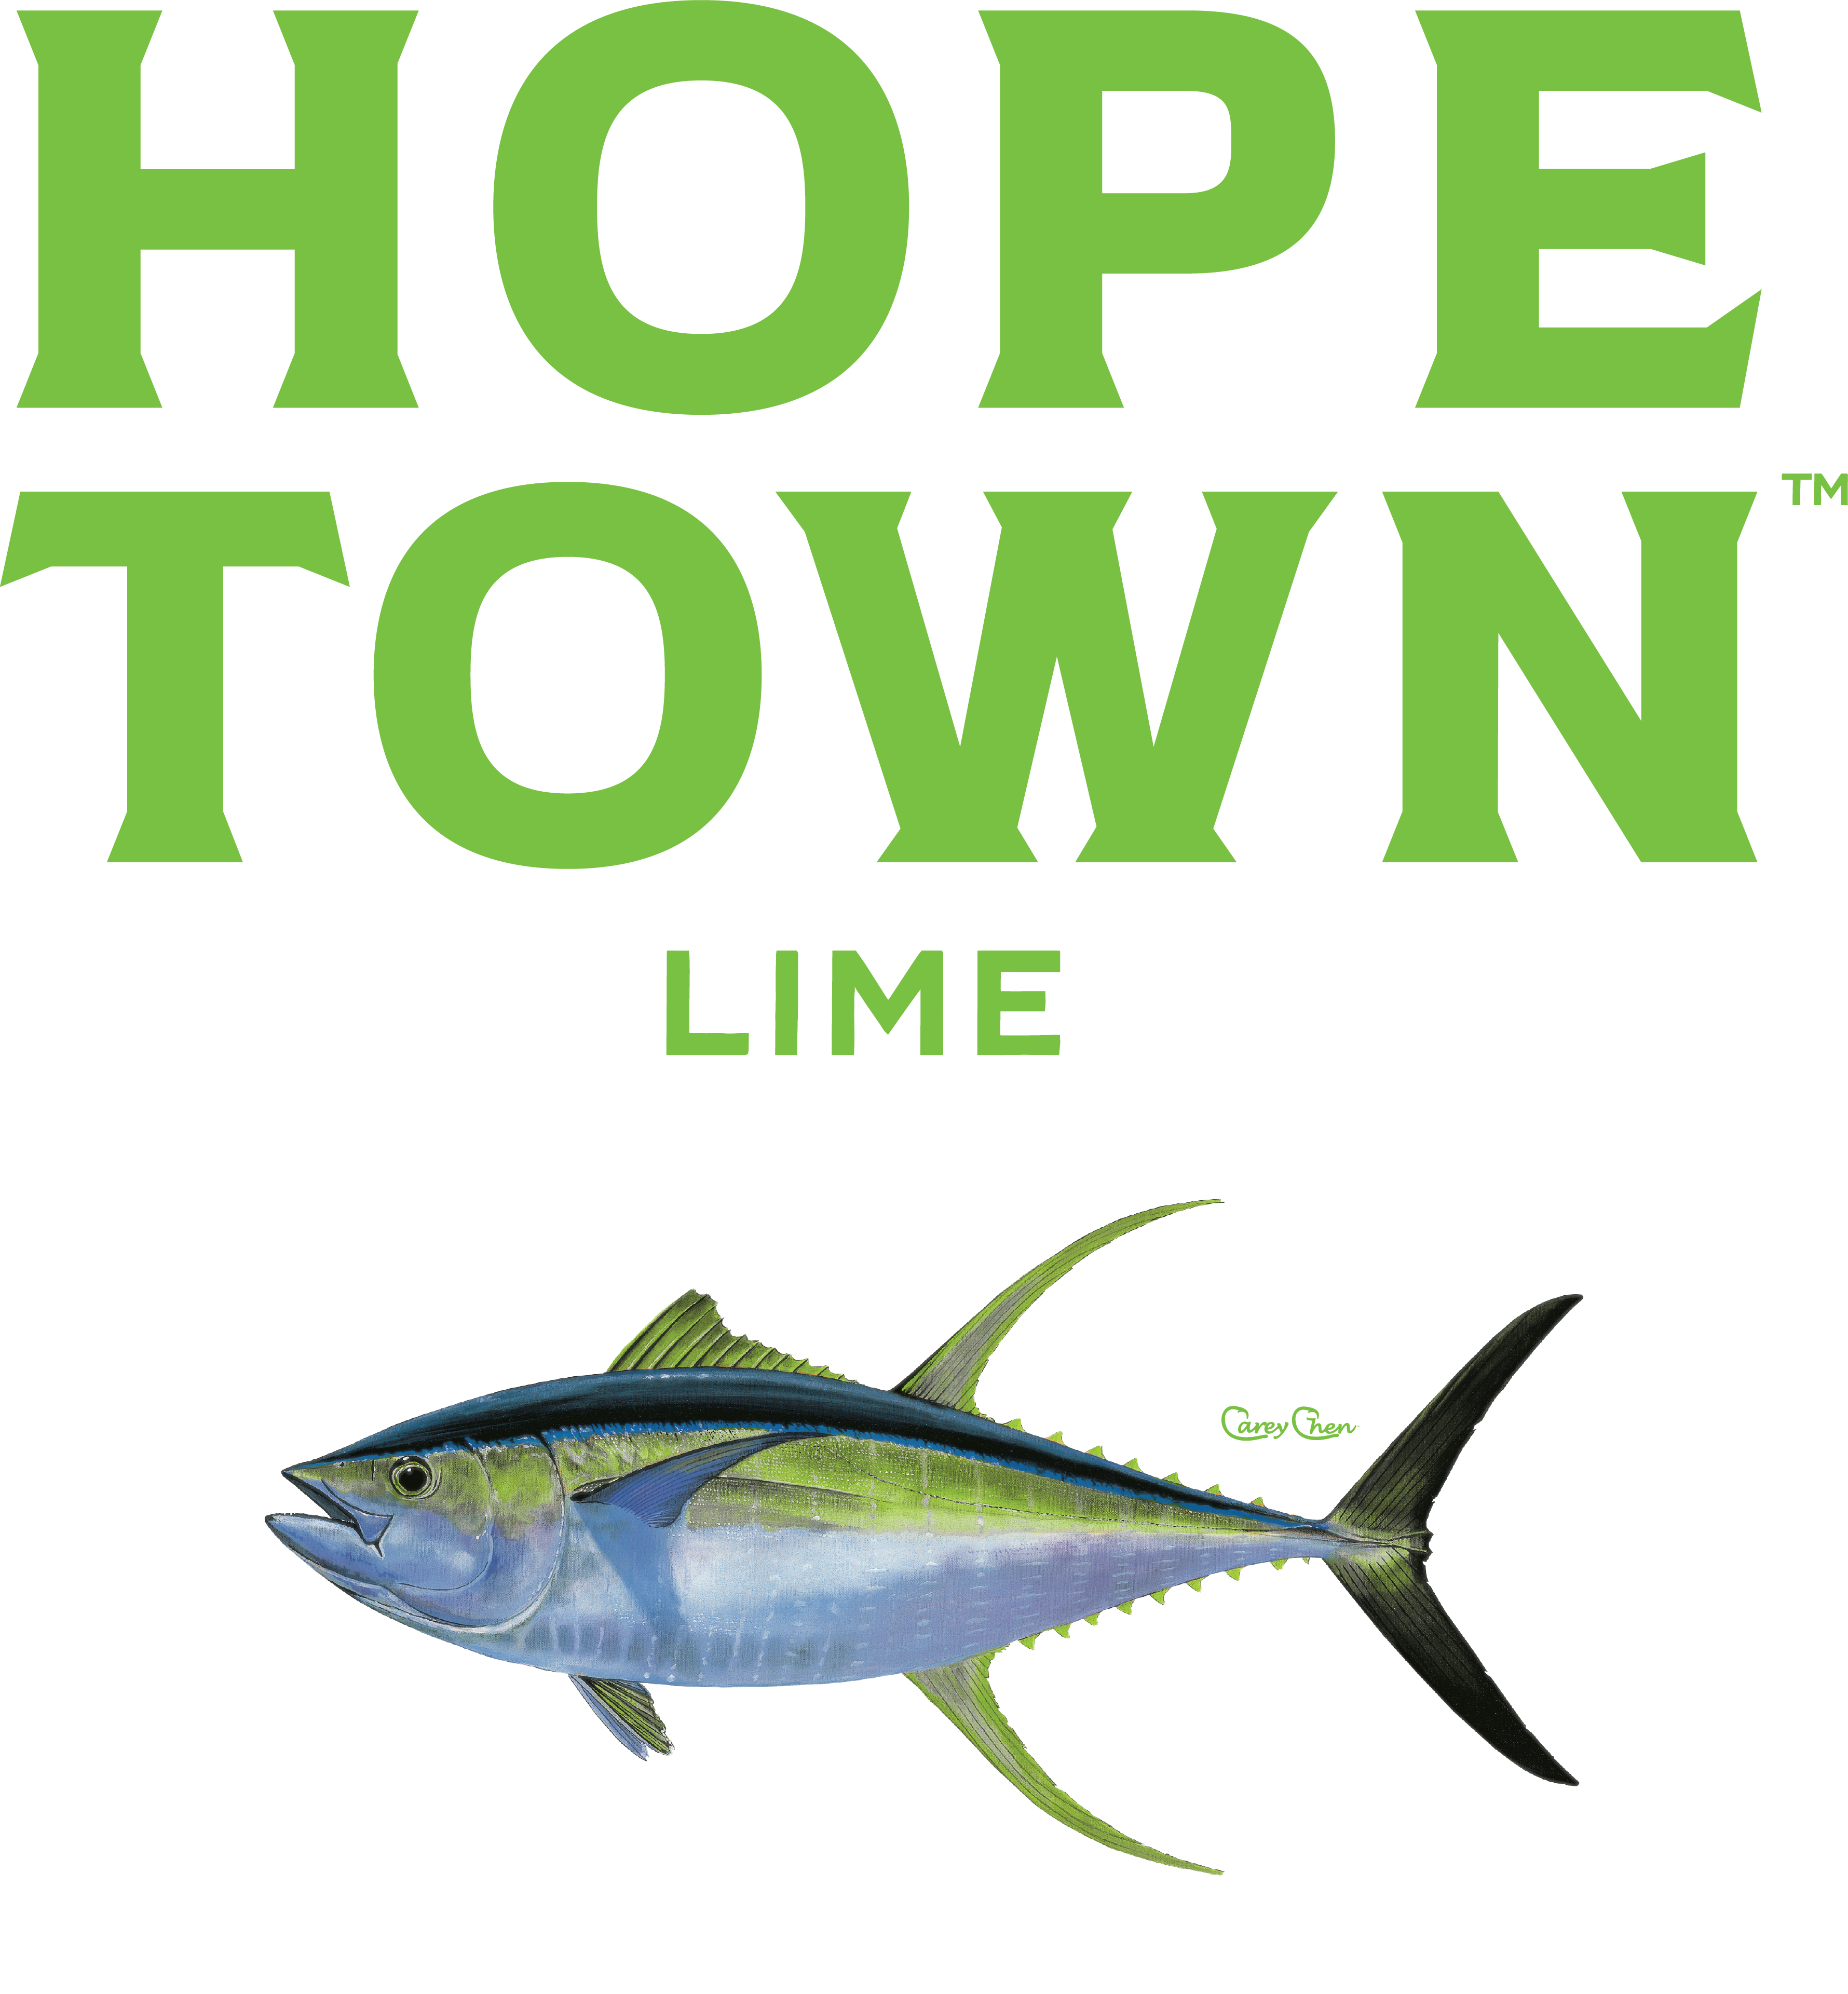 HOPE TOWN LIME VODKA